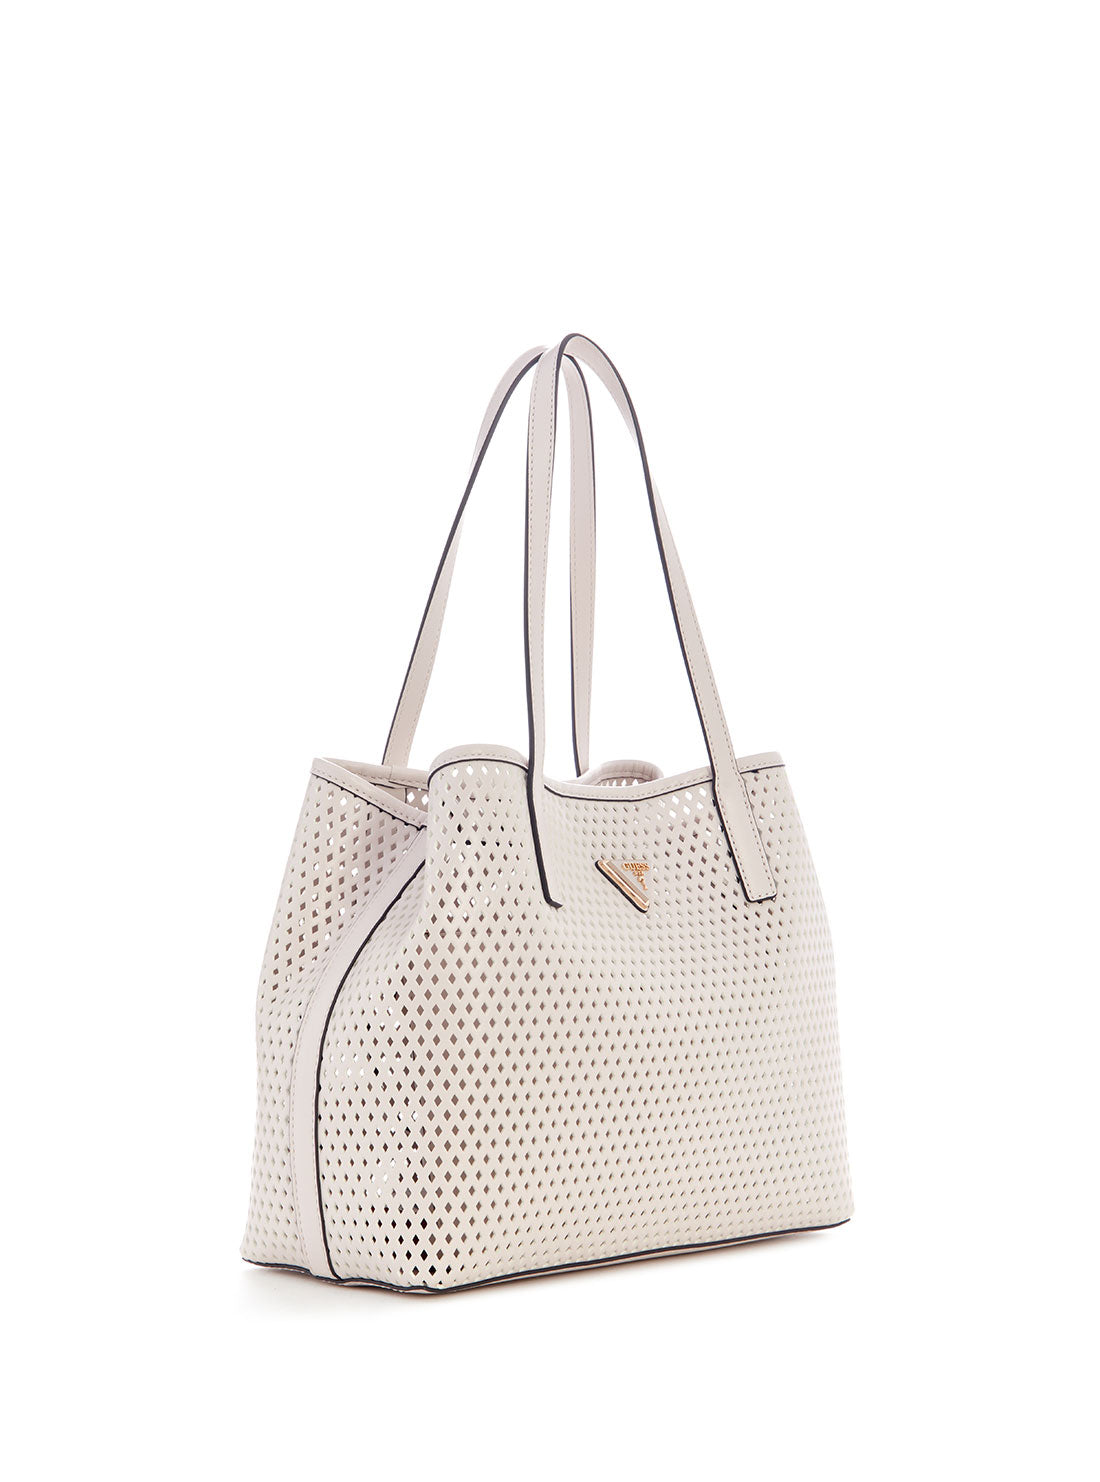 GUESS Women's Stone Woven Vikky Tote Bag WP699523 Angle View